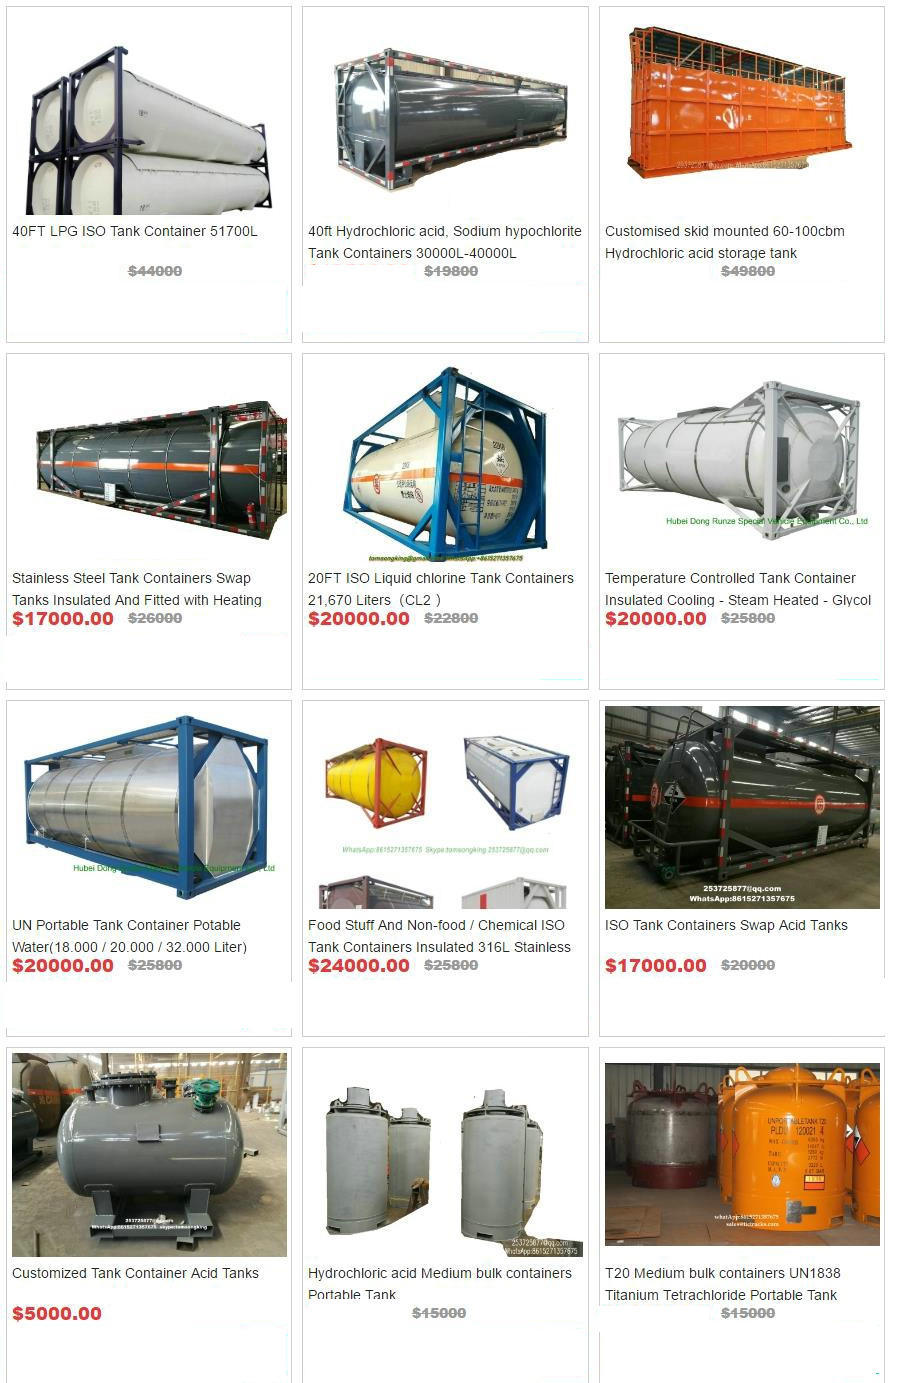 20FT Tank Container for Hydrogen Peroxide (H2O2 max 30%) Phosphoric Acid (H3PO4 10%-85%) Road Transportation 21cbm